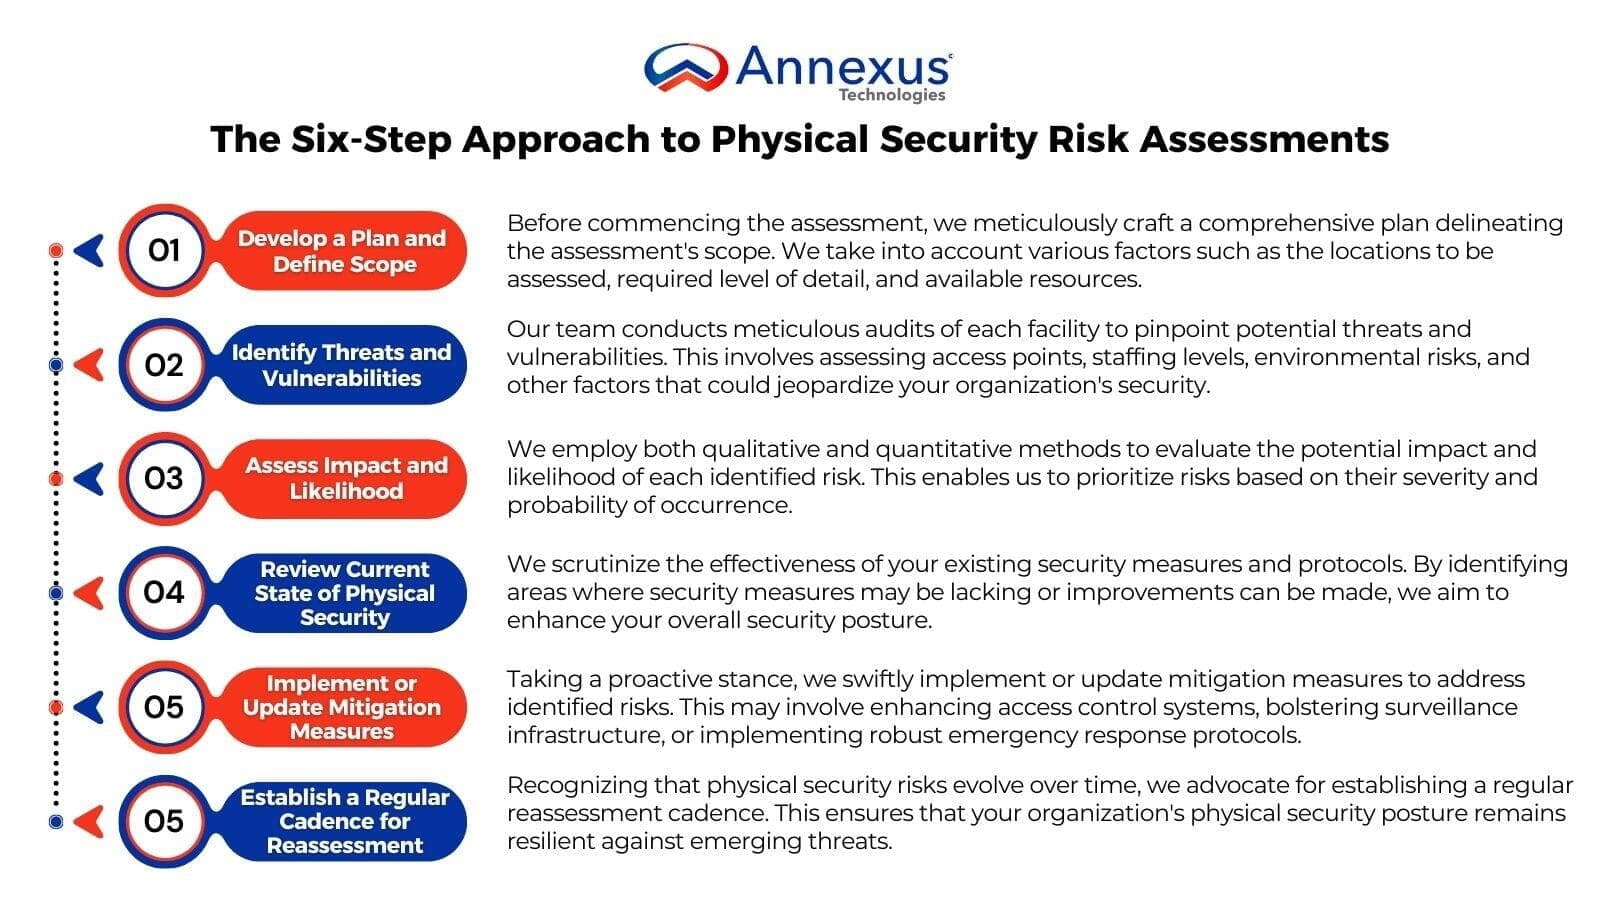 The Six Steps approach to Physical Security Risk Assessments